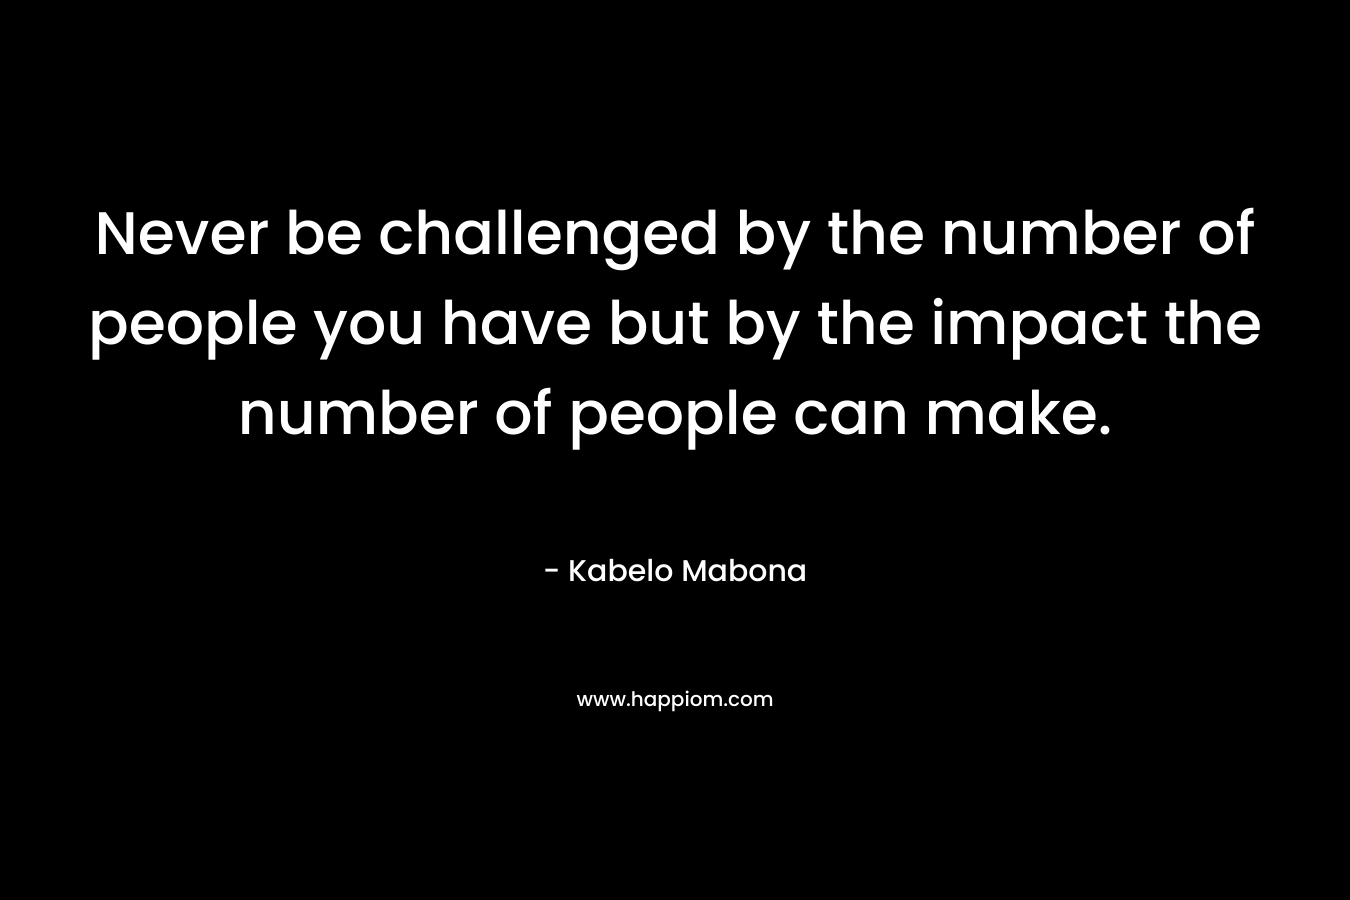 Never be challenged by the number of people you have but by the impact the number of people can make.